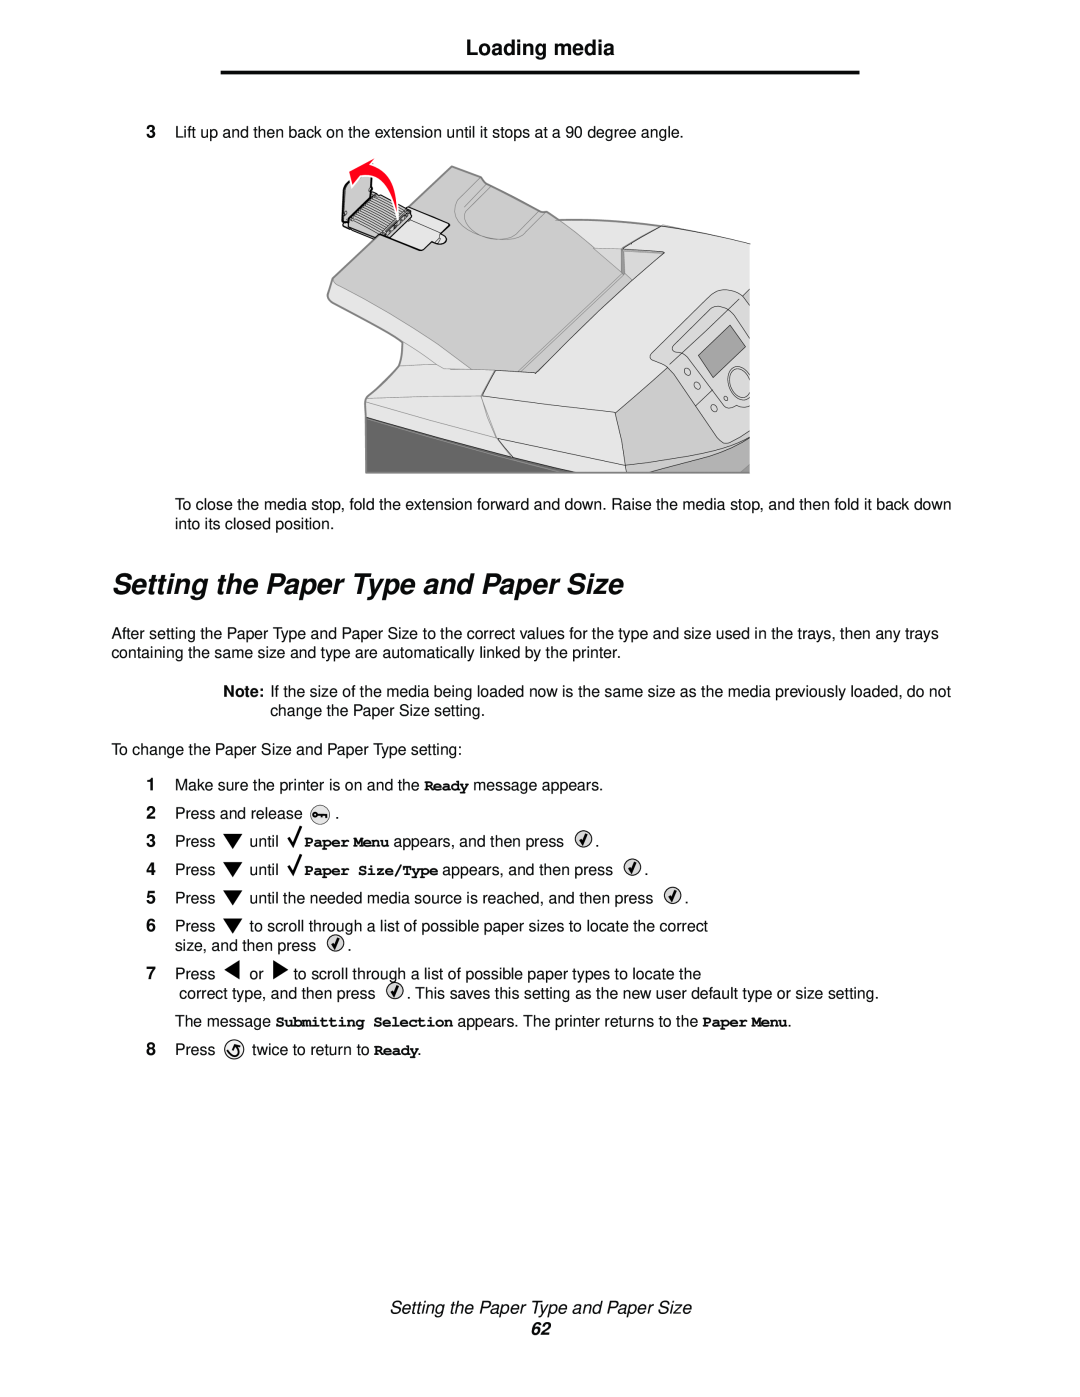 Lexmark C522, C524, C520 manual Setting the Paper Type and Paper Size, Loading media 